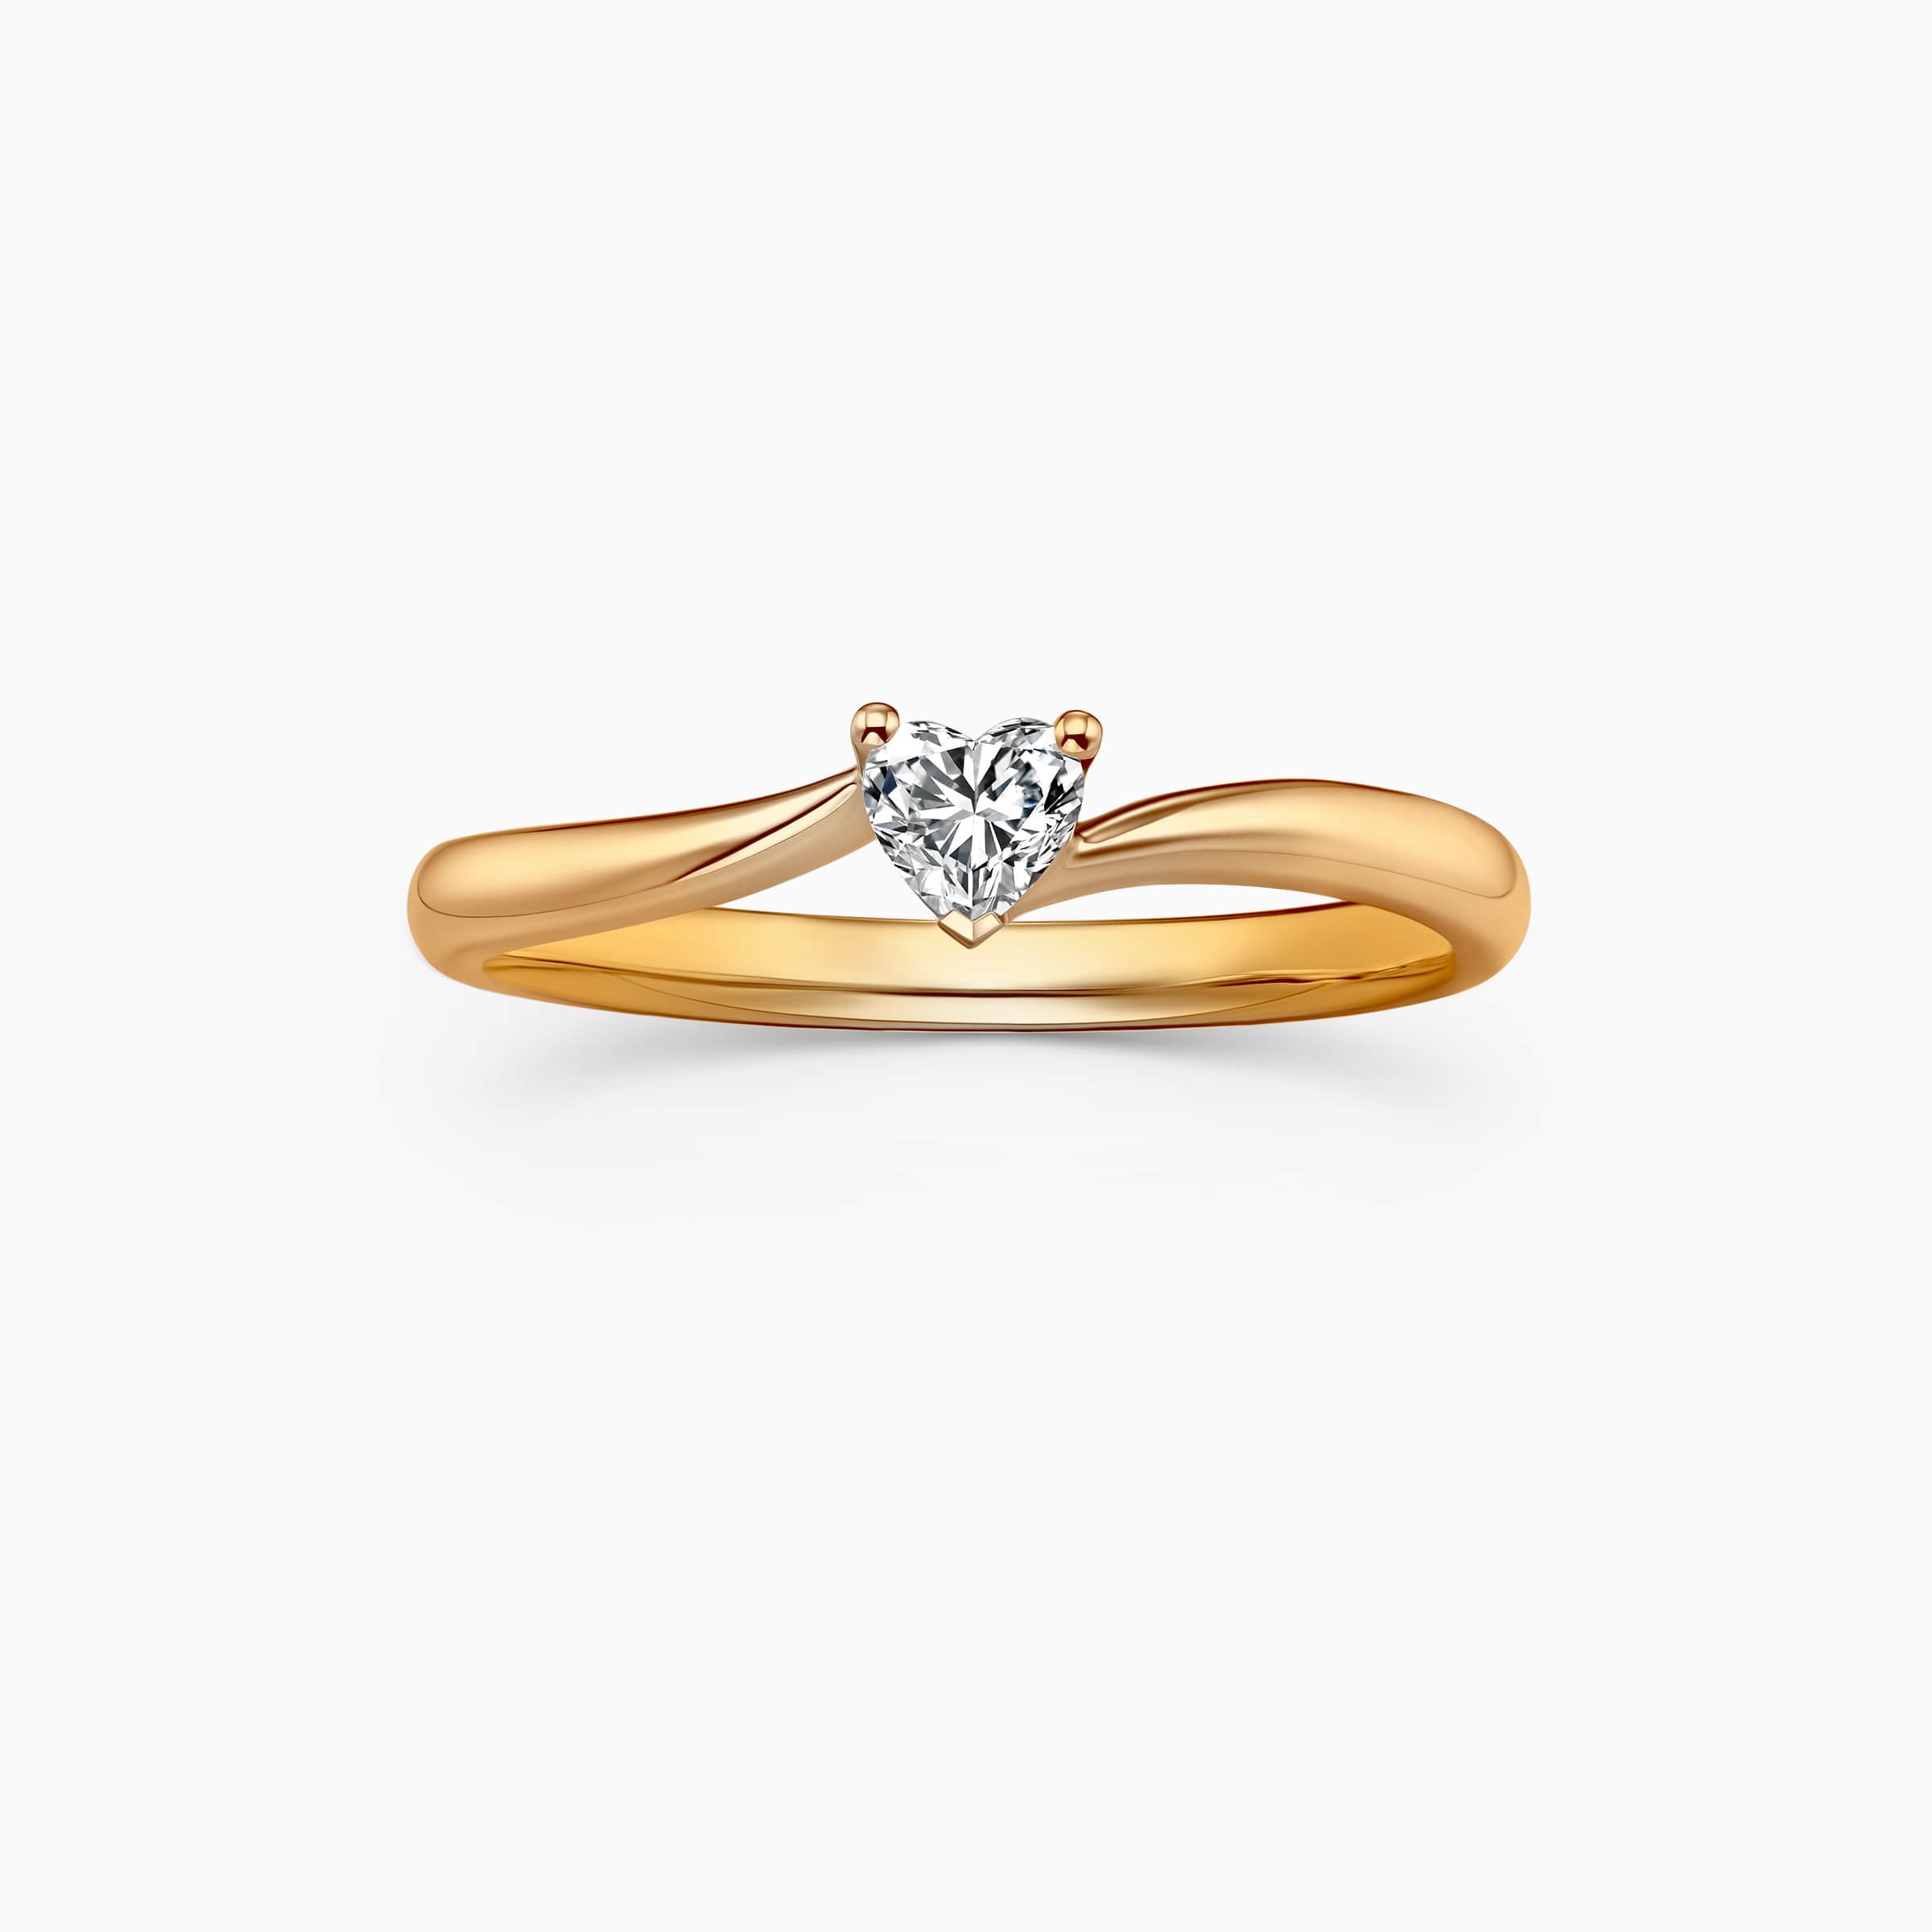 Darry Ring heart solitaire promise ring yellow gold